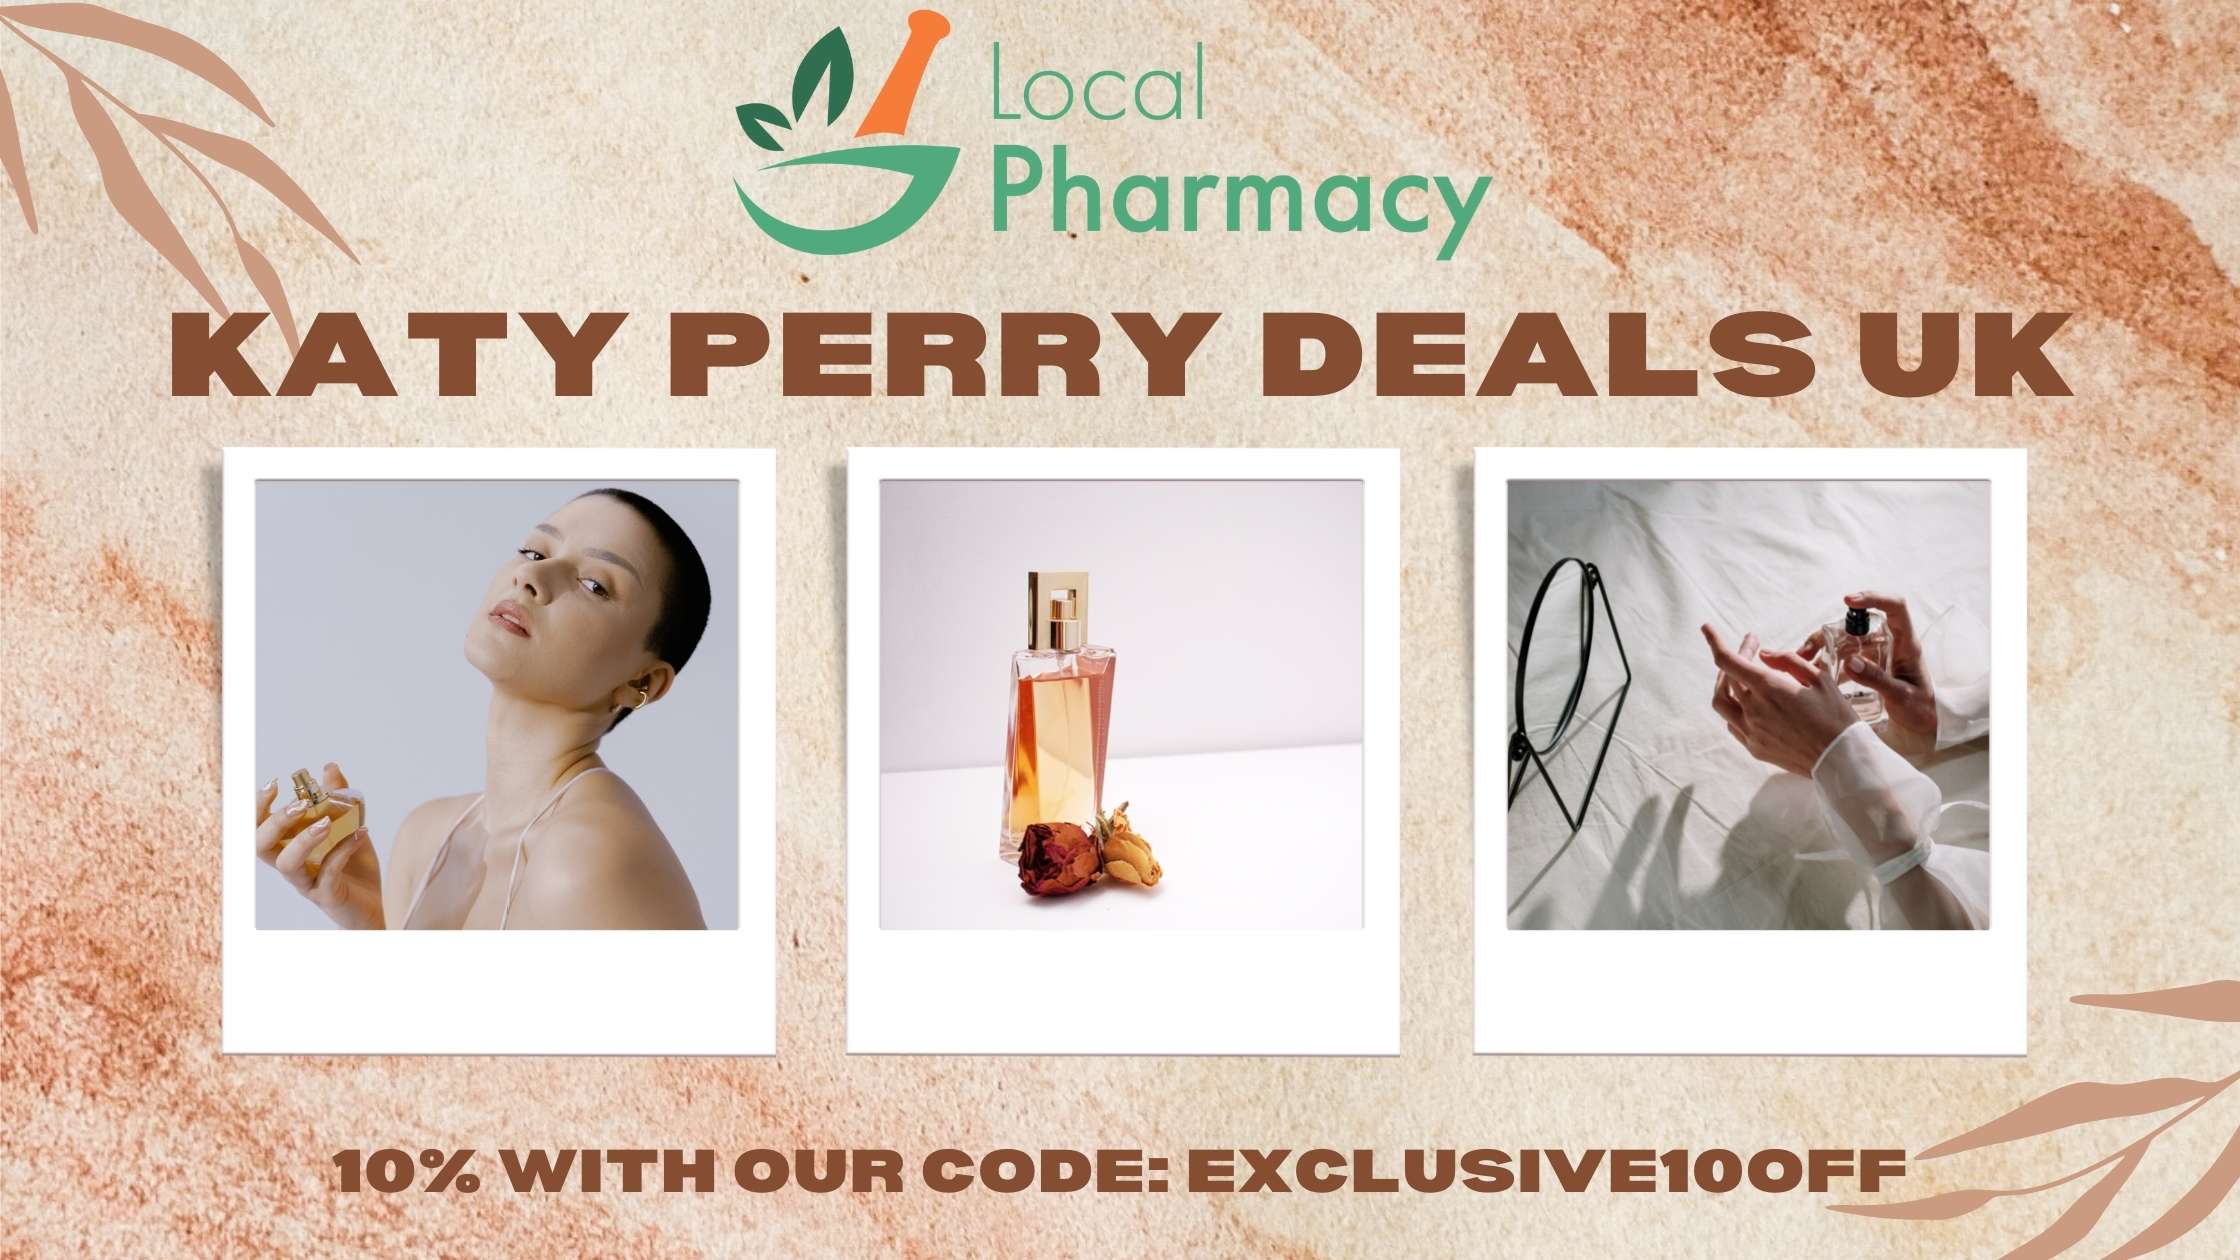 Katy Perry coupon code and deals uk